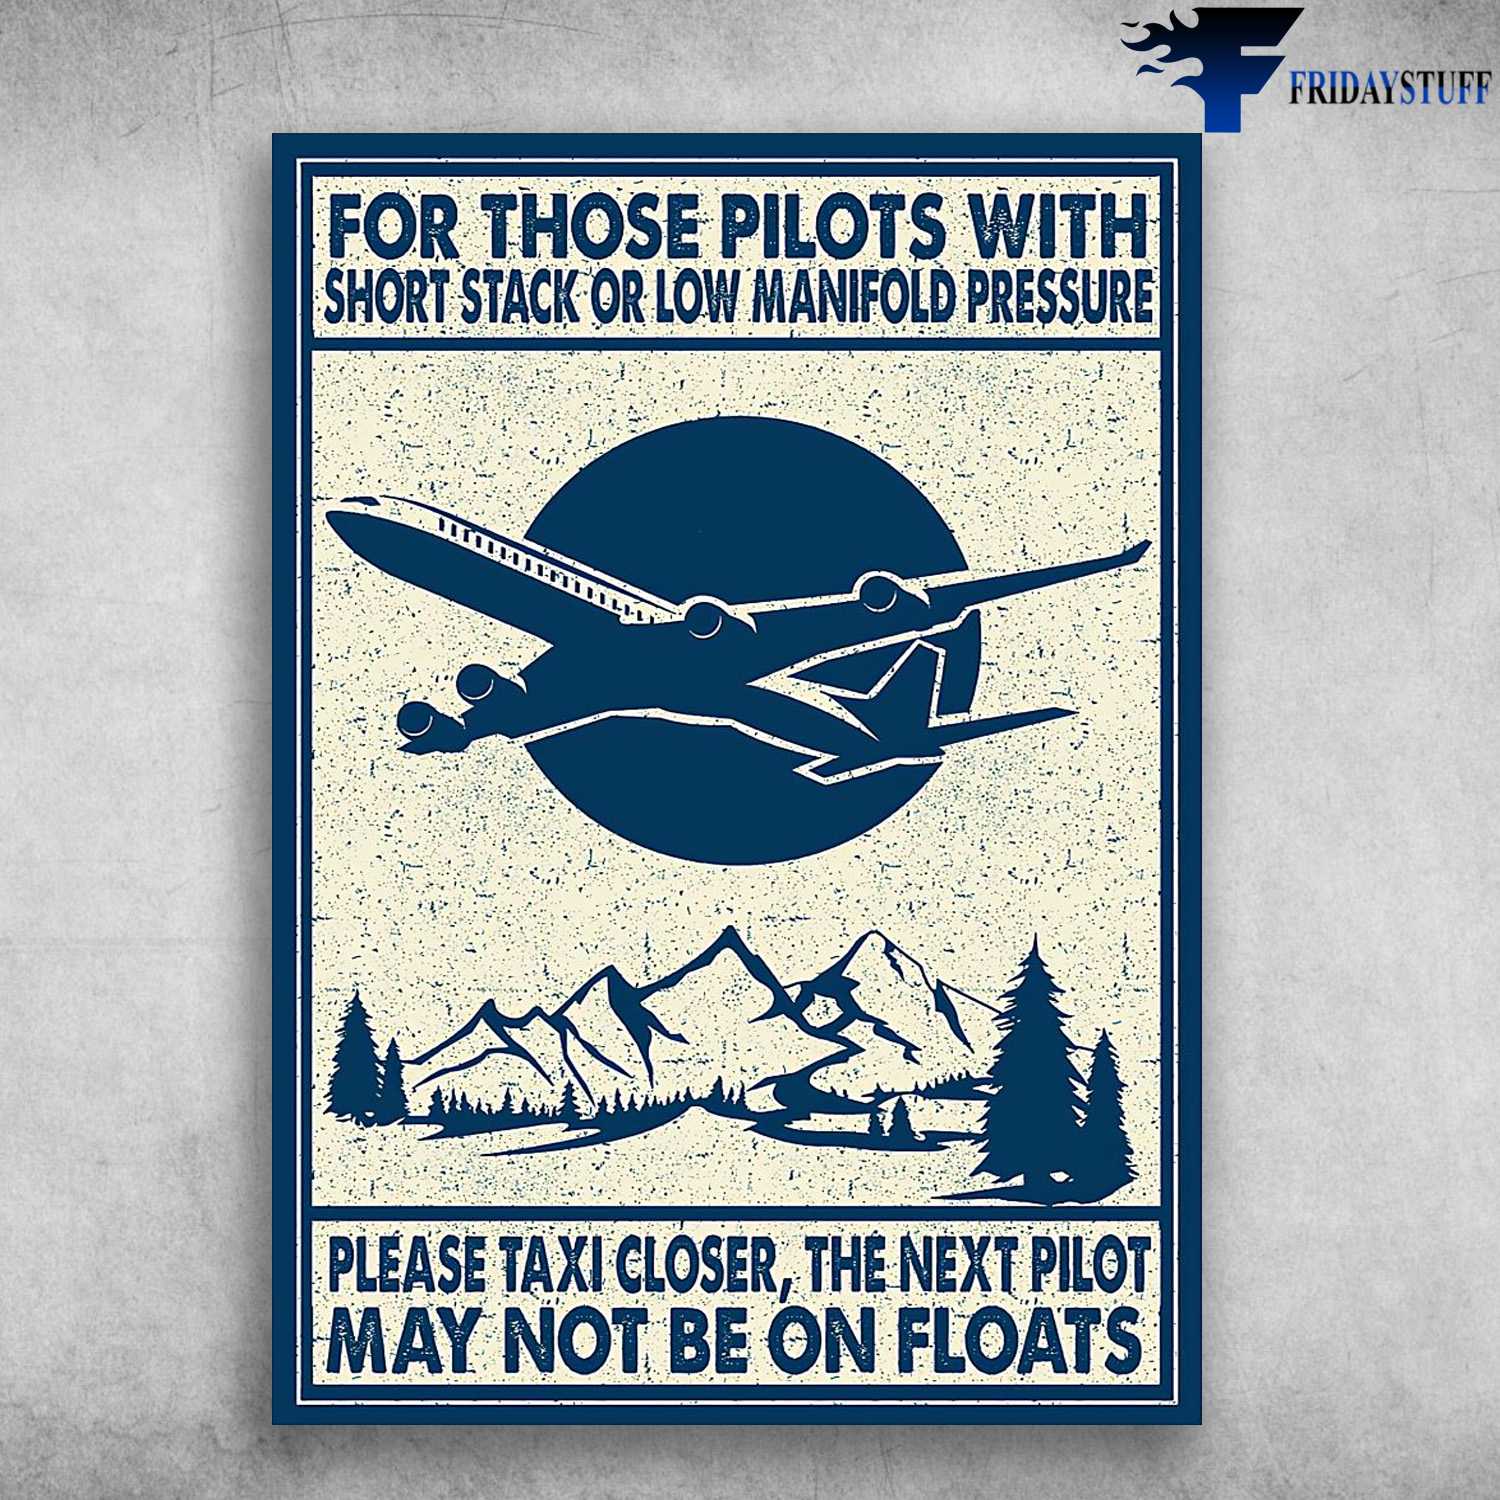 Pilot Plane Poster - For Those Pilots With, Short Stack Or Low Manifold Pressure, Please Taxi Closer, The Next Pilot, May Not Be On Floats